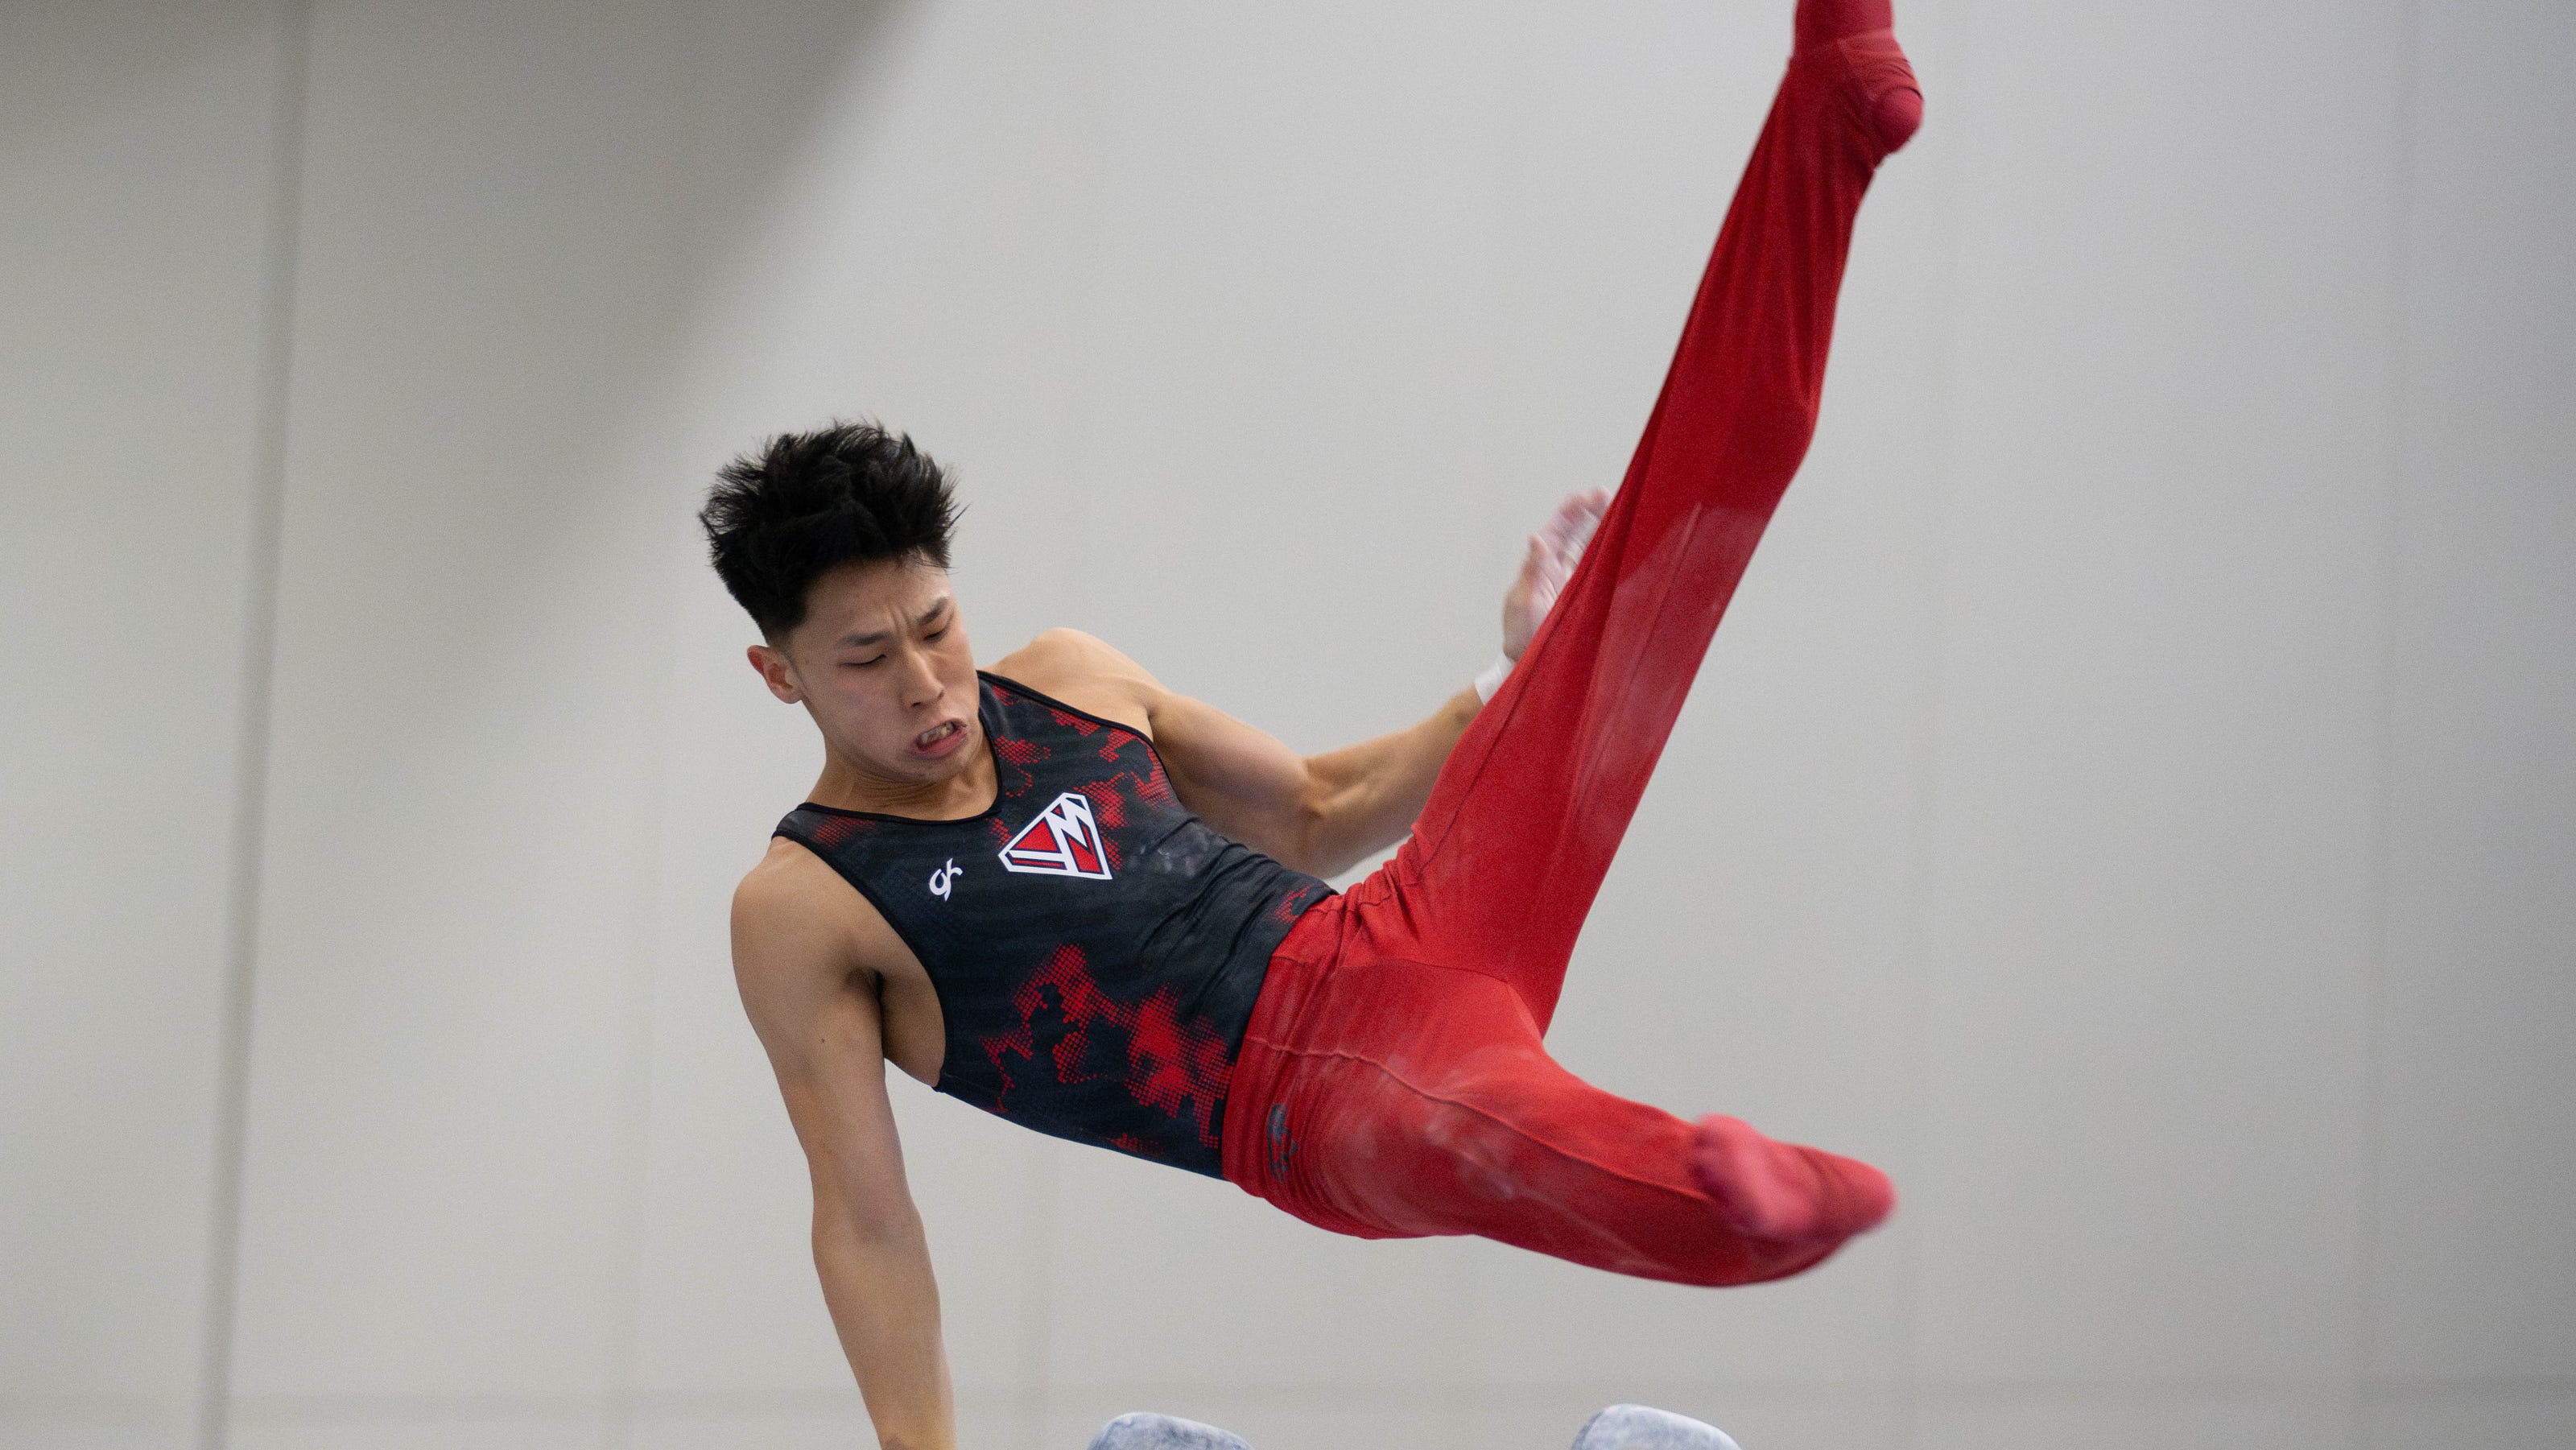 USA gymnastics championships live updates: What to know about tonight’s men’s competition